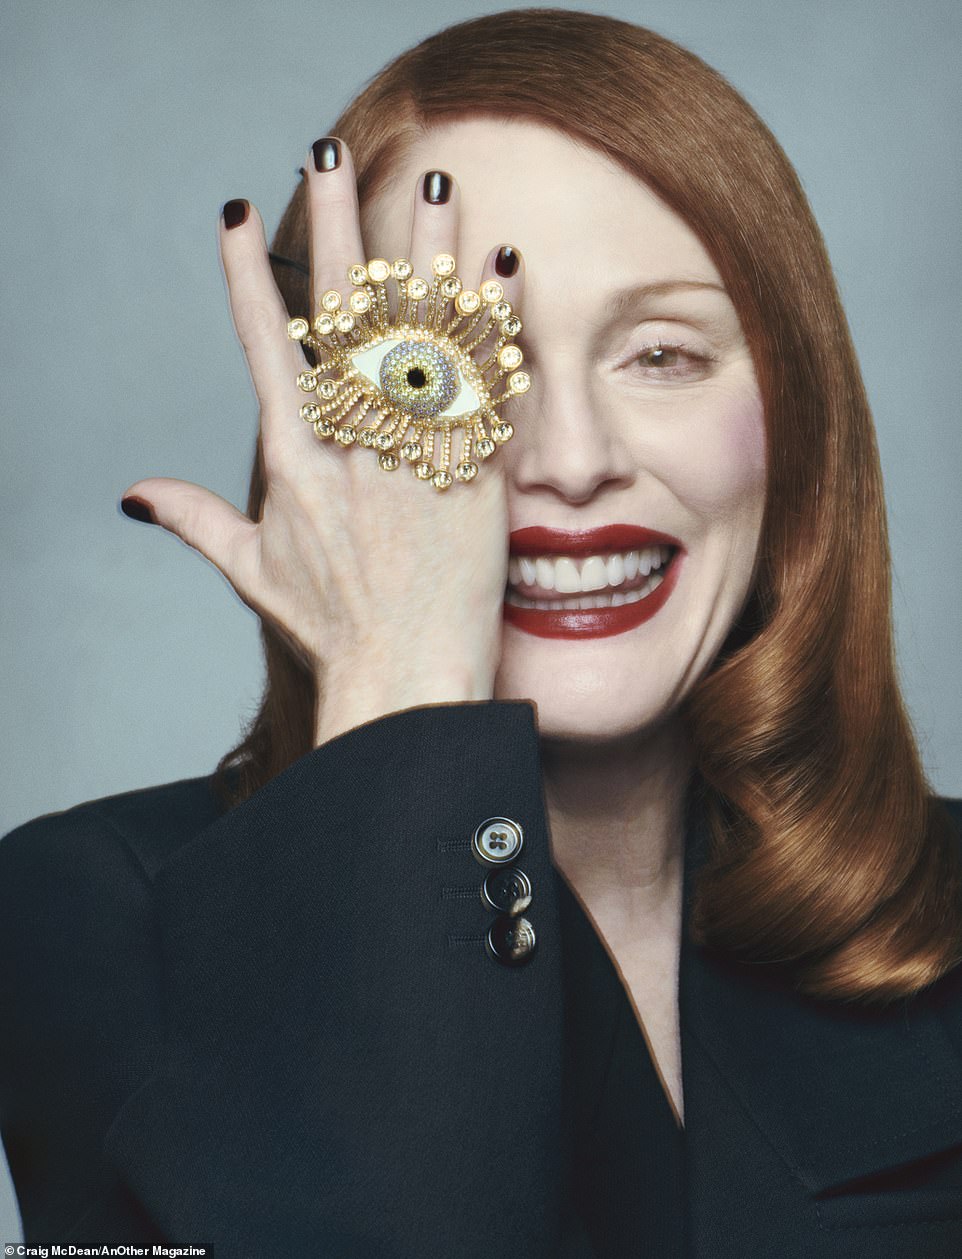 In a more whimsical photo, the star wears a Bottega Veneta jacket and a large Schiaparelli ring with an eye, which she playfully placed over her own eye.